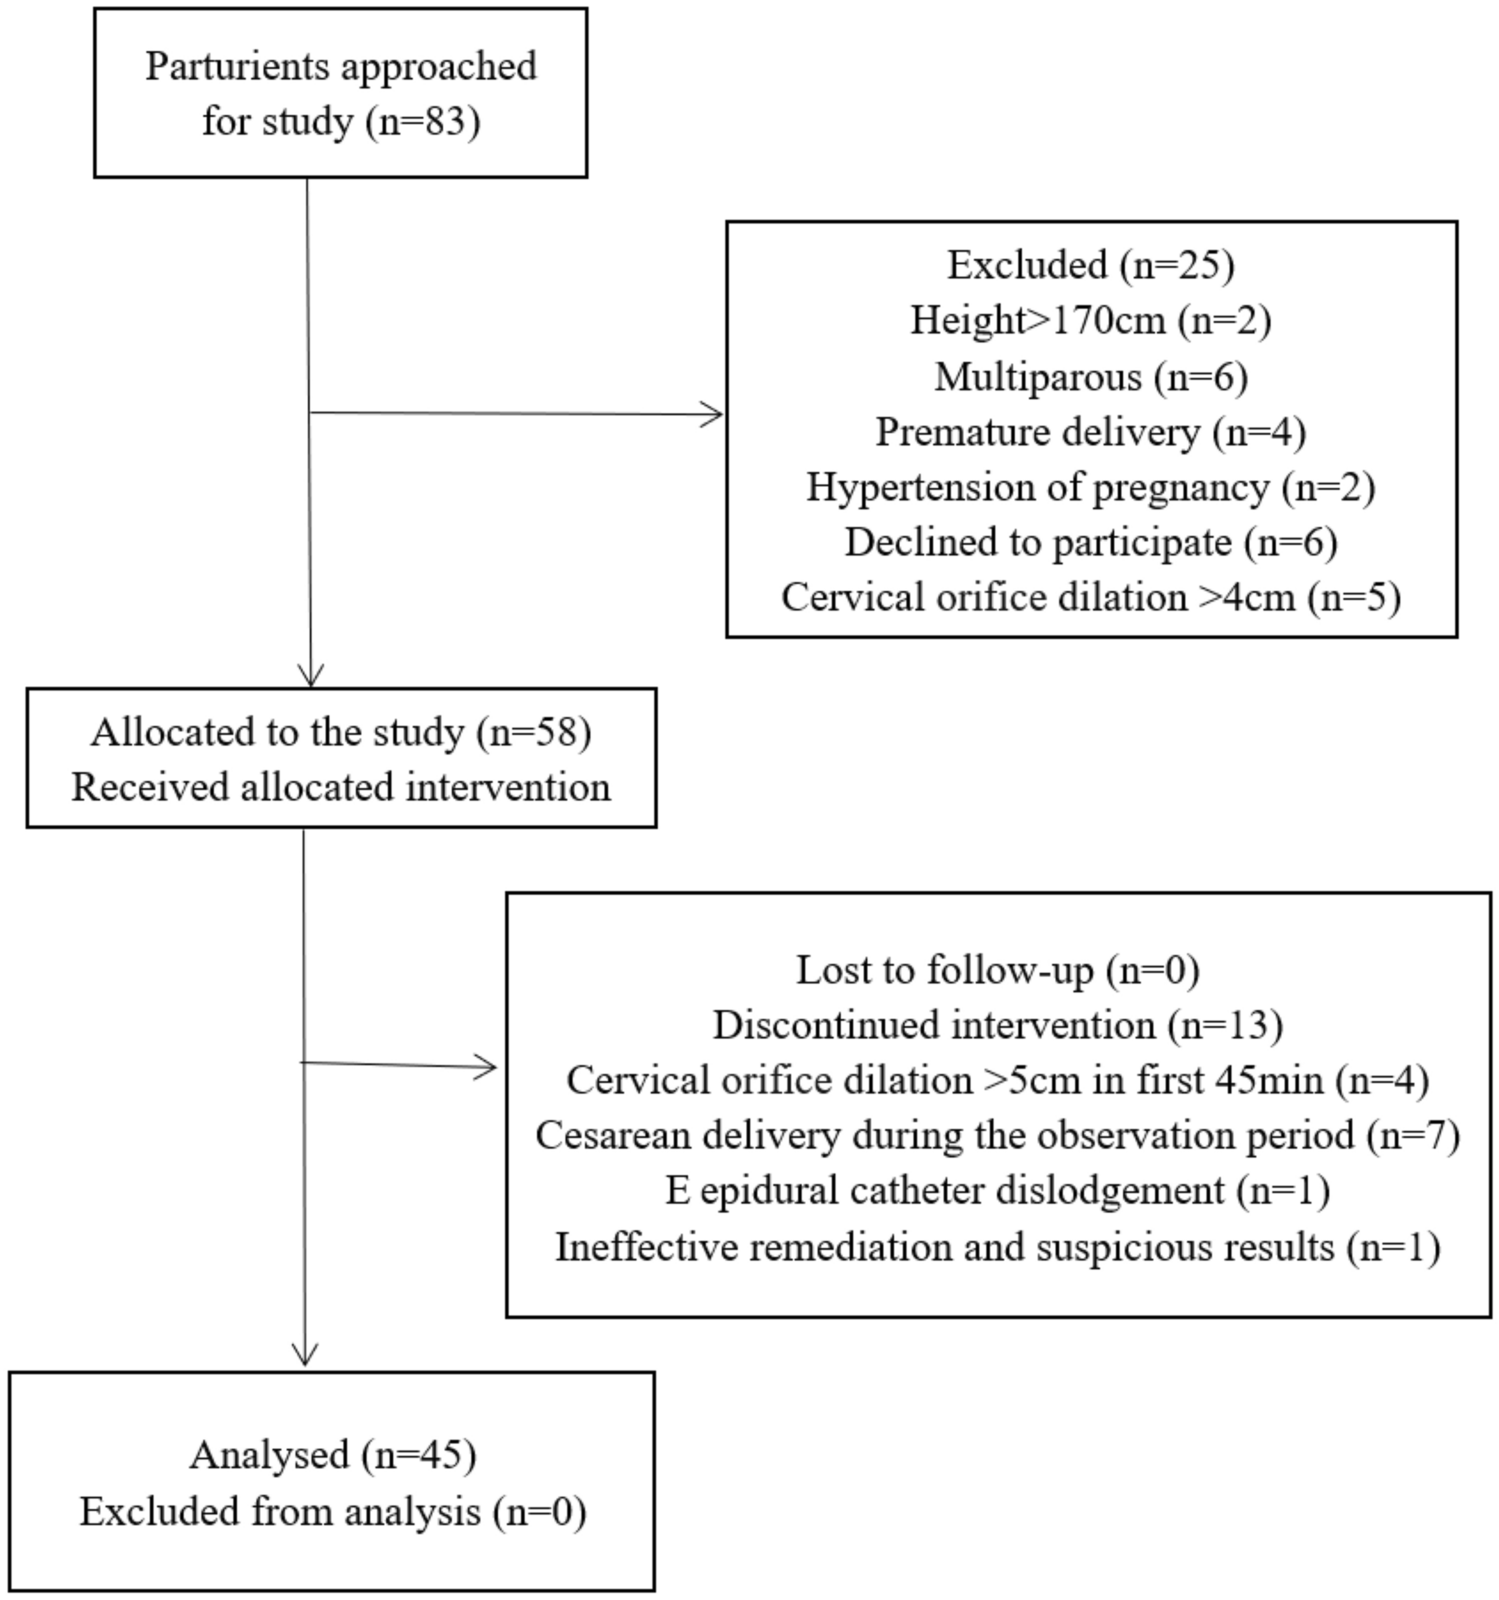 The 90% effective concentration of alfentanil combined with 0.075% ropivacaine for epidural labor analgesia: a single-center, prospective, double-blind sequential allocation biased-coin design